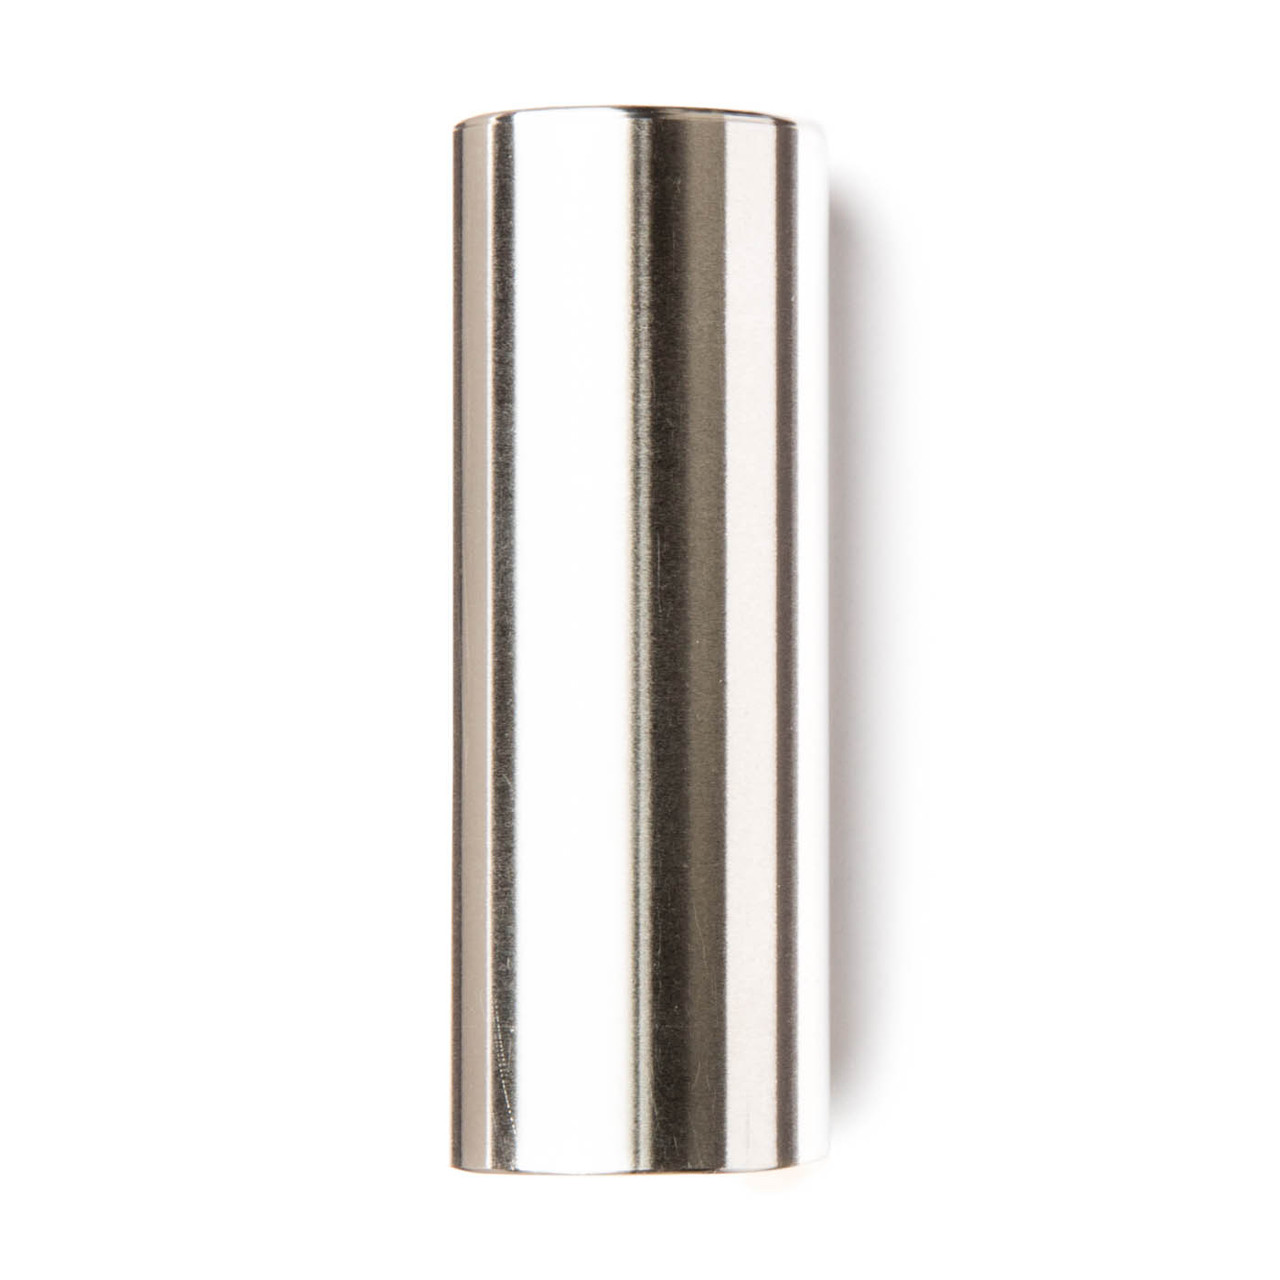 Dunlop Stainless Steel Large Wall Slide